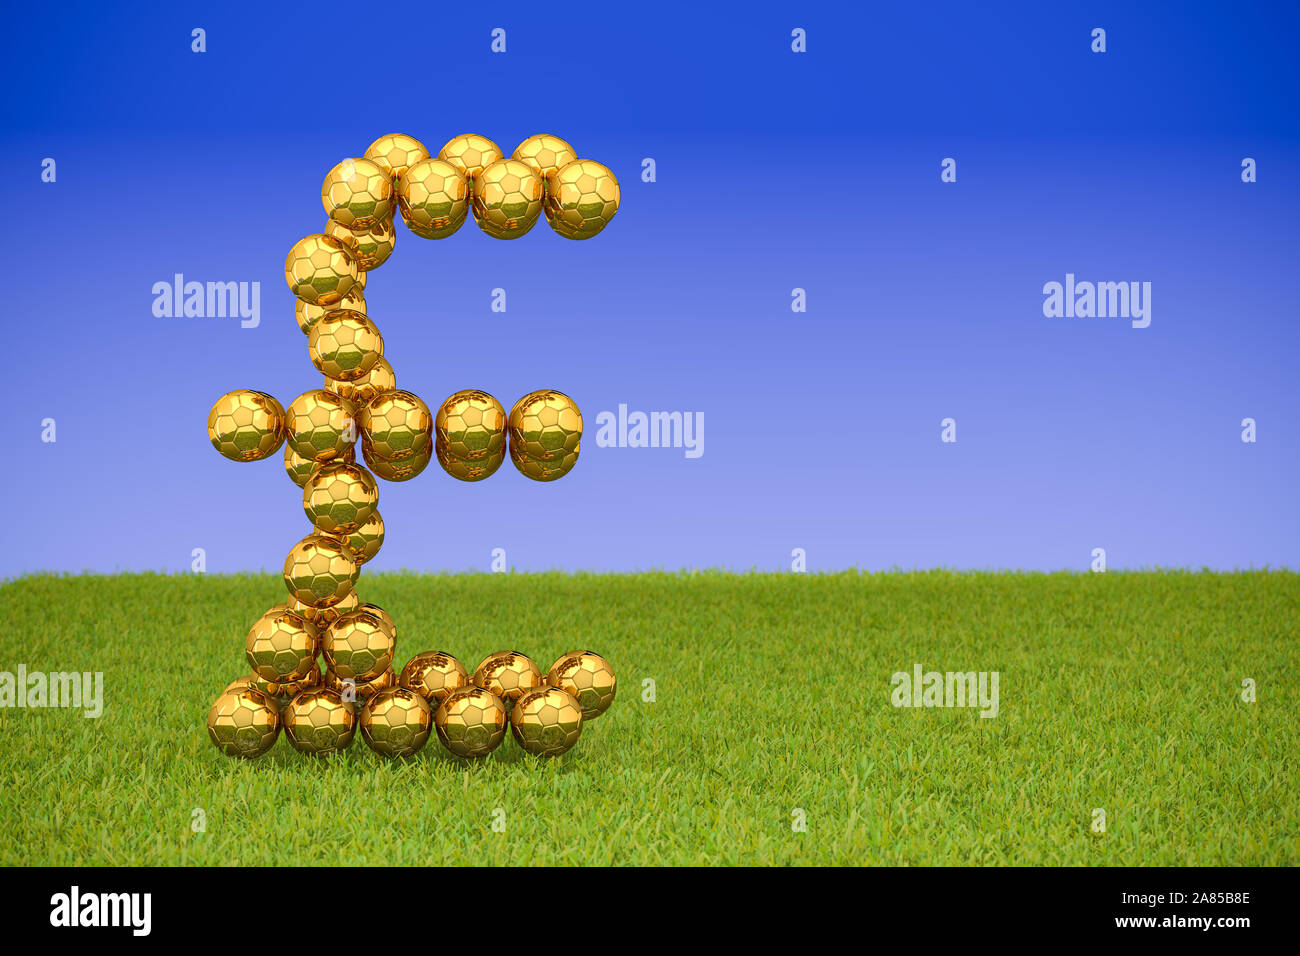 3D render: Golden Soccer balls forming a British Pound sign on grass and blue sky background. Big Business / corruption in sports, football, soccer. C Stock Photo